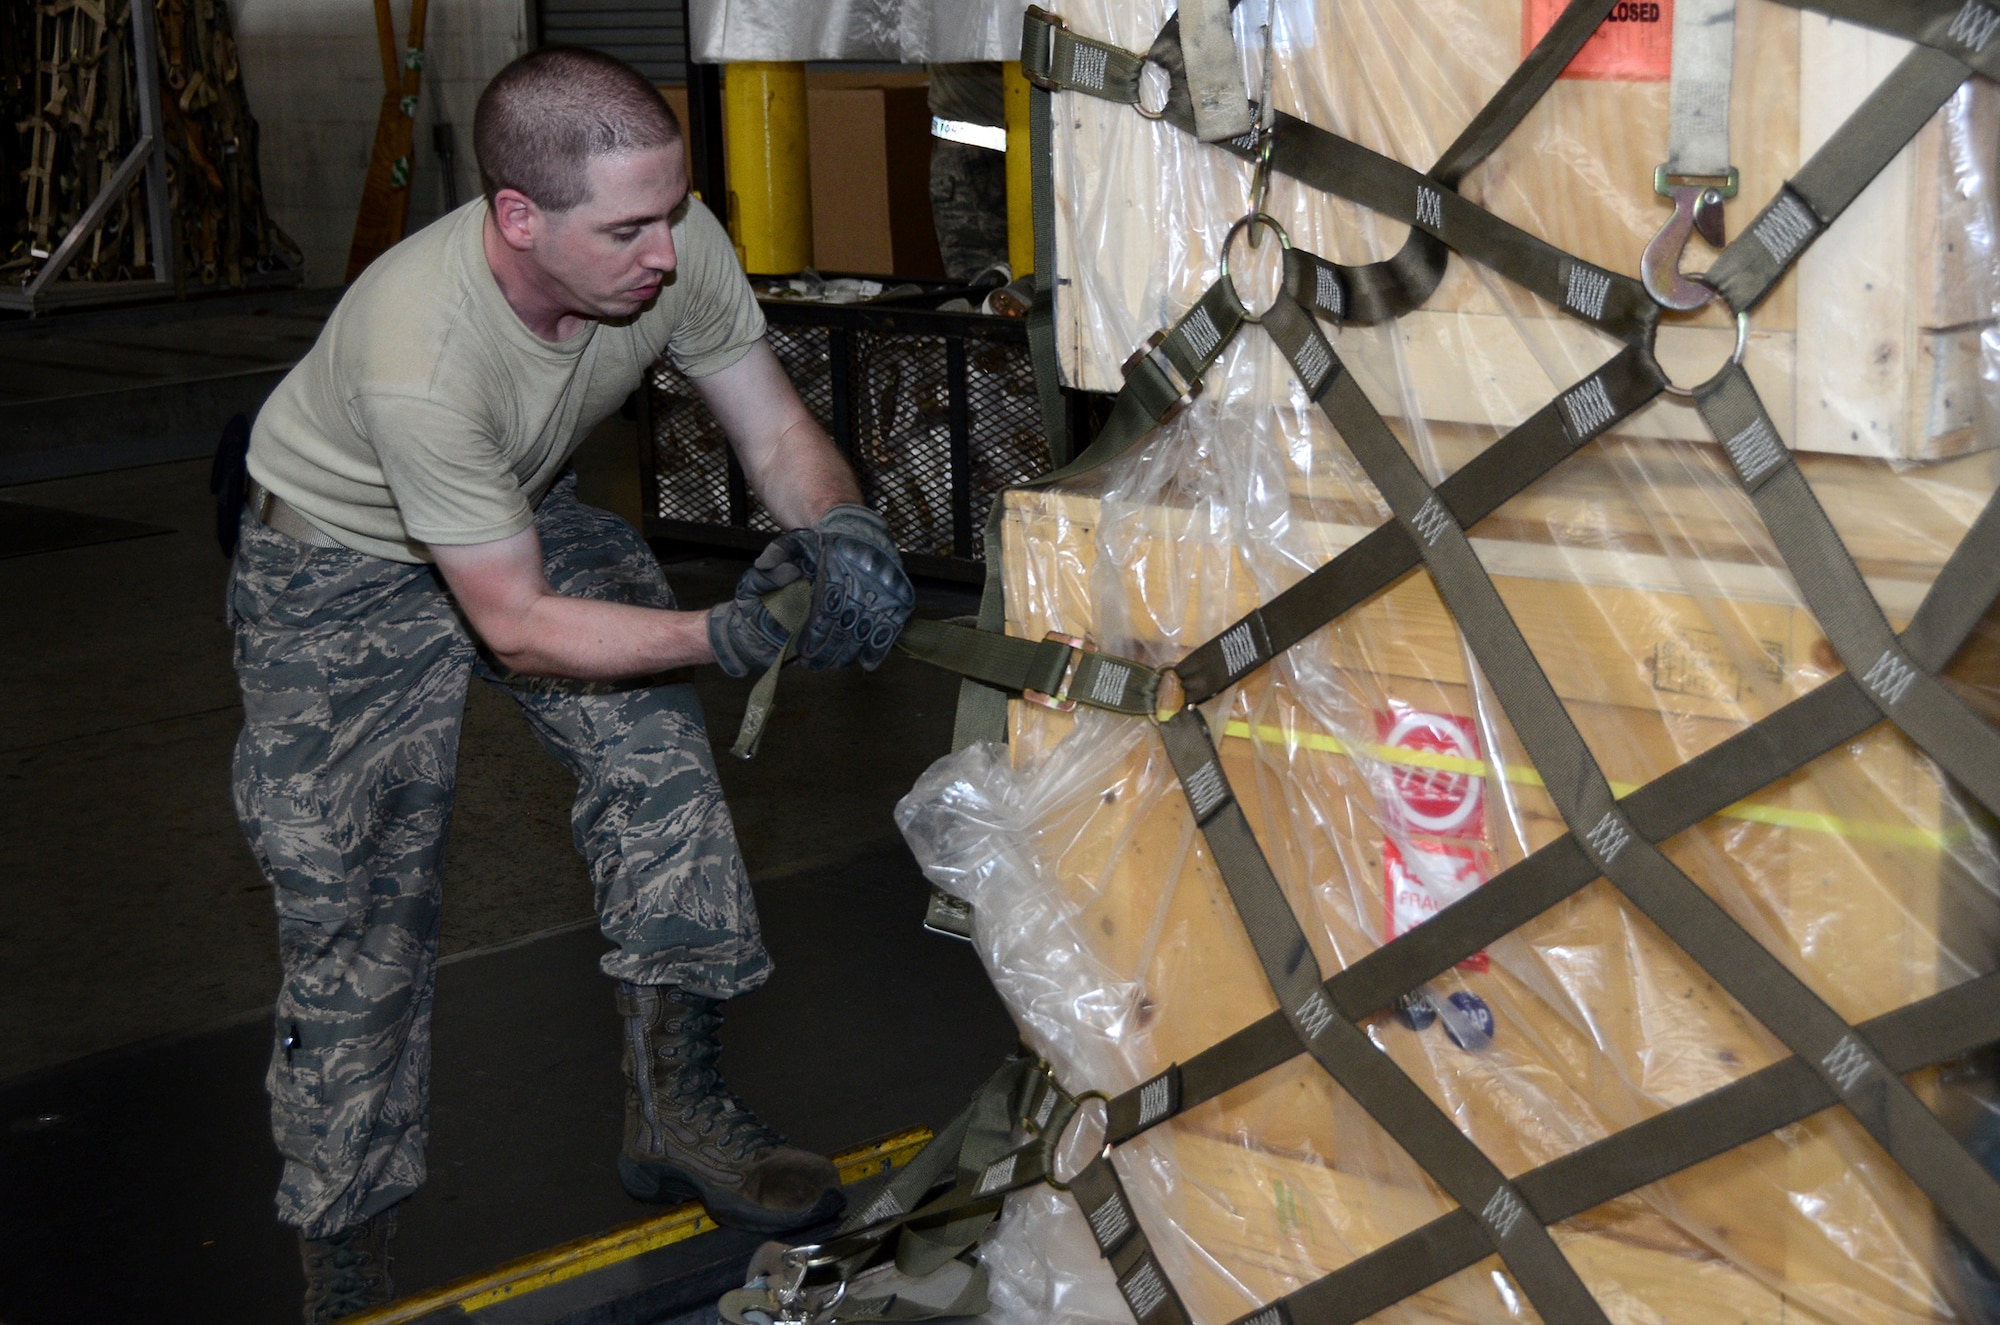 Senior Airman Matthew Ferhman, 87th Aerial Port Squadron air transportation journeyman, tightens a cargo net on a pallet in the cargo processing section at the 436th Aerial Port Squadron, Dover Air Force Base, Delaware, July 19, 2019 during his annual tour training